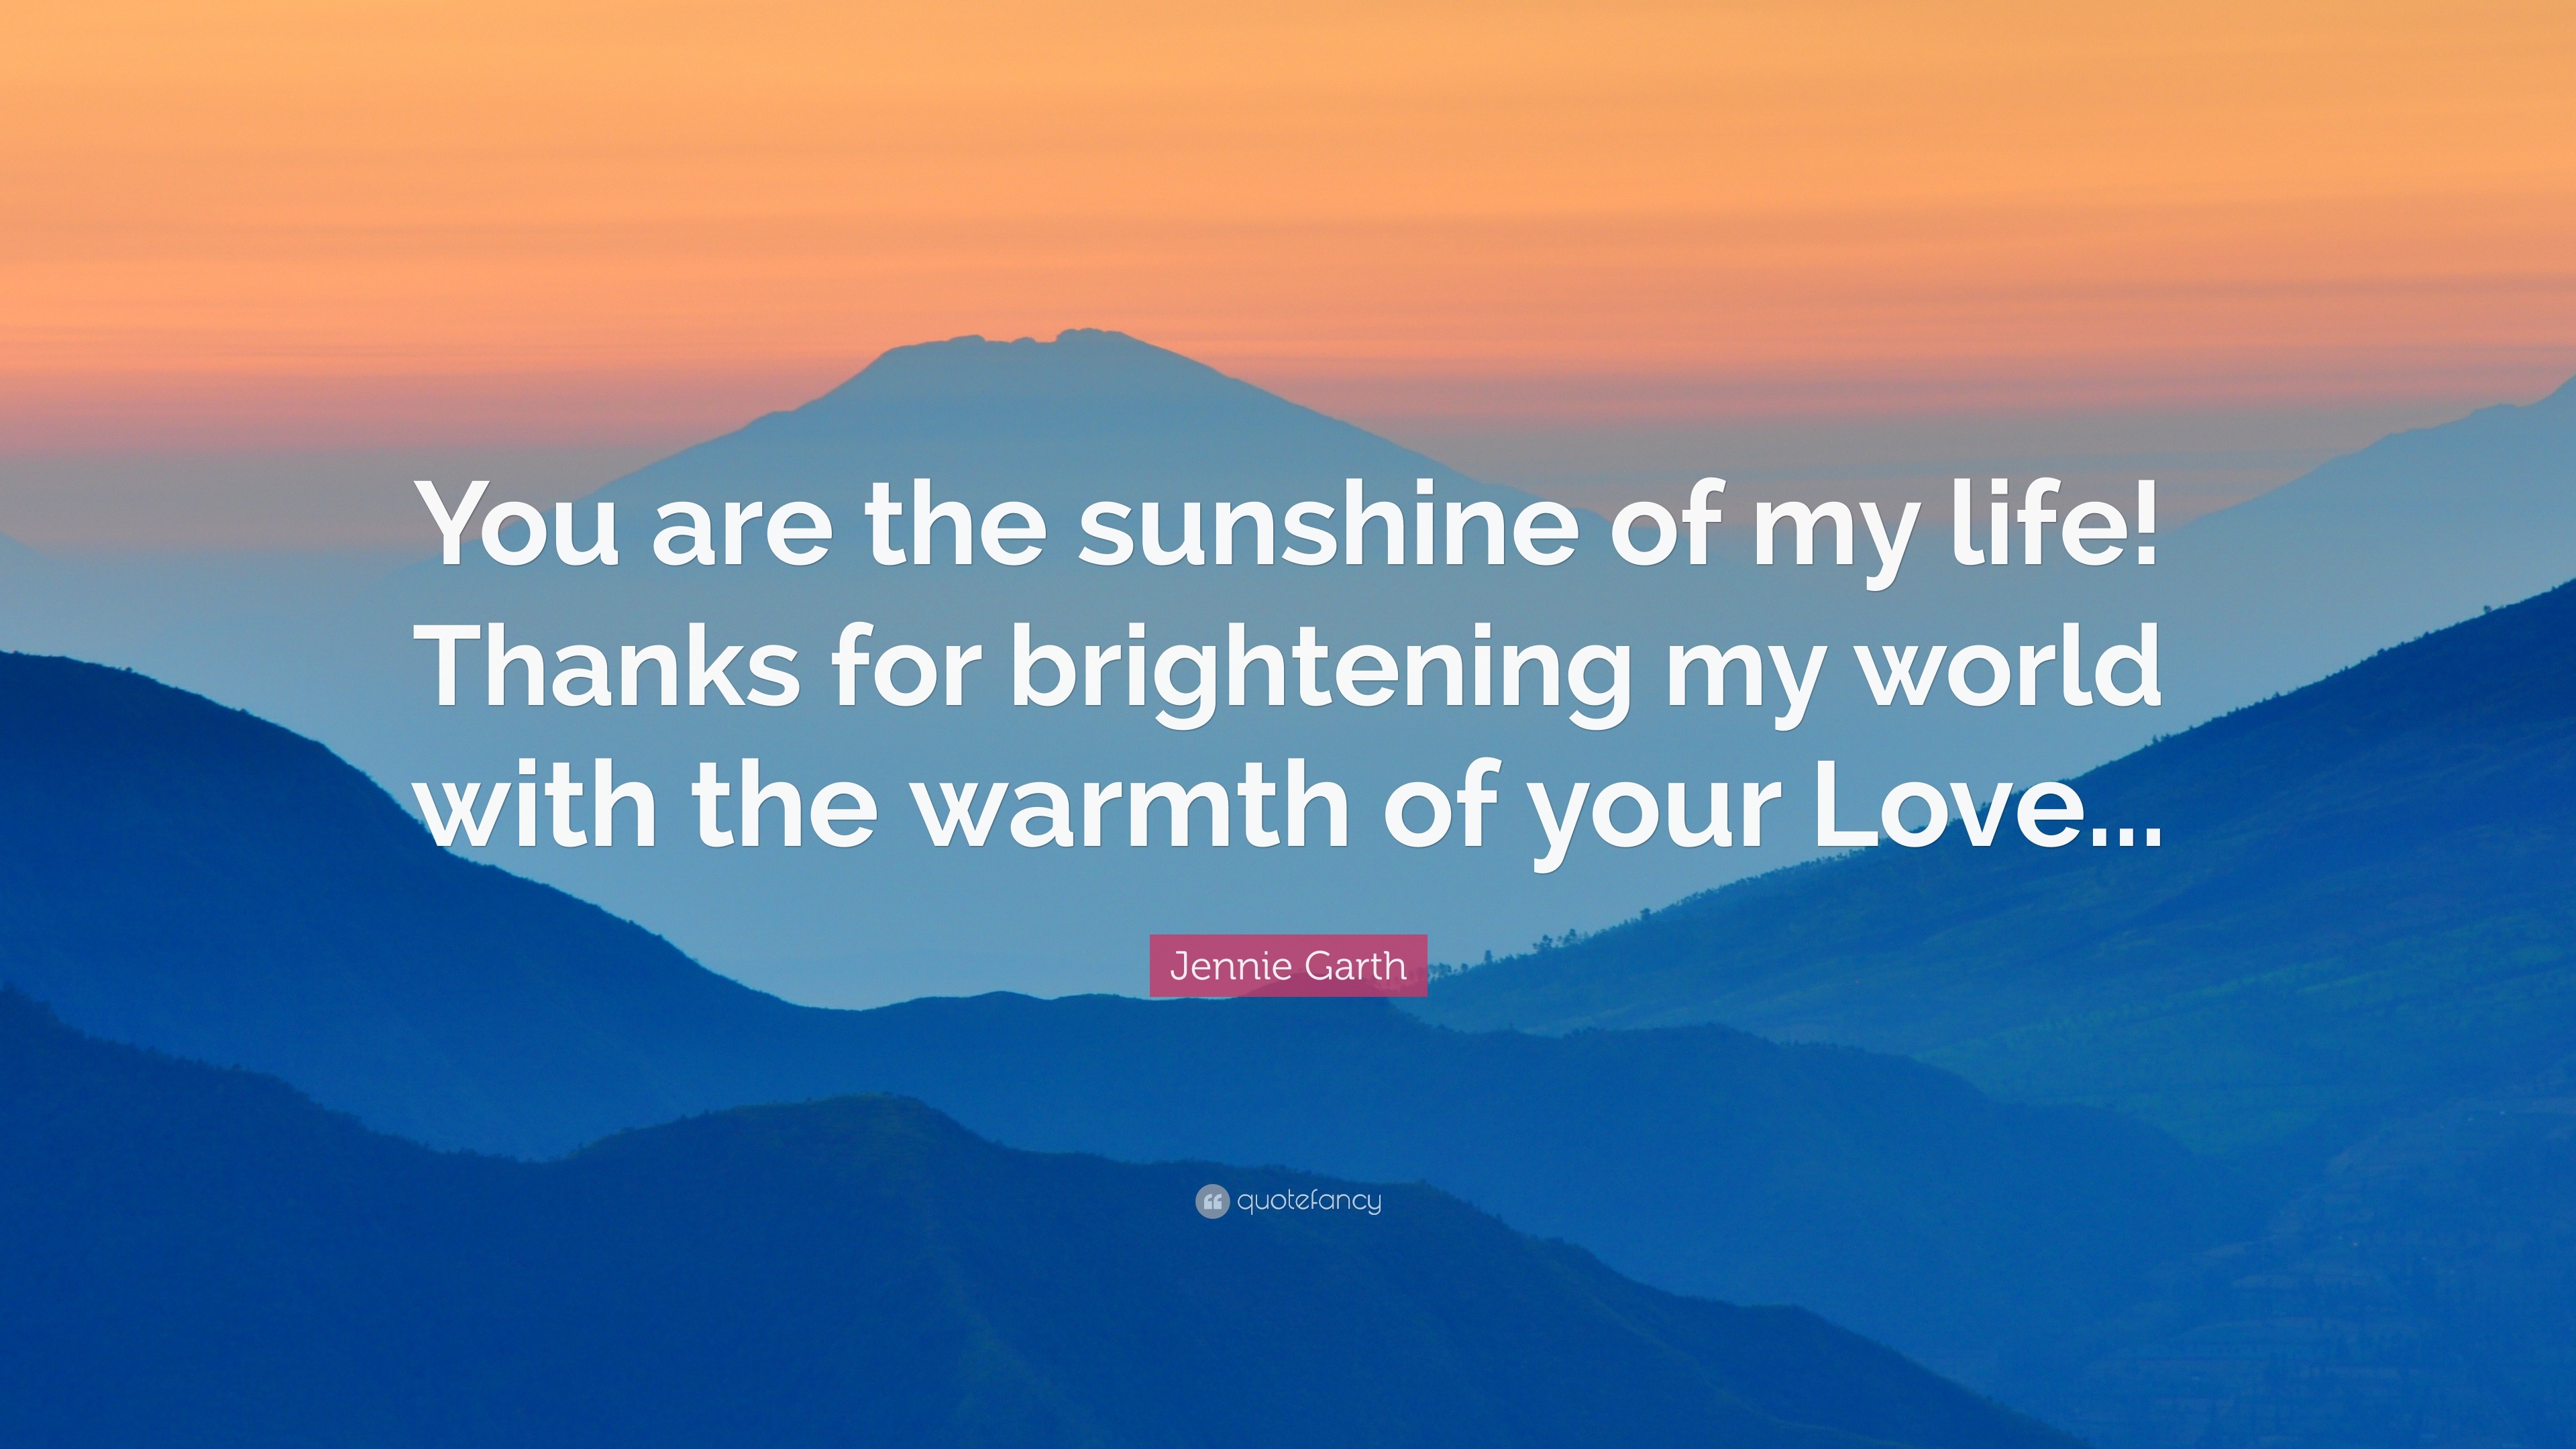 Jennie Garth Quote “You are the sunshine of my life Thanks for brightening